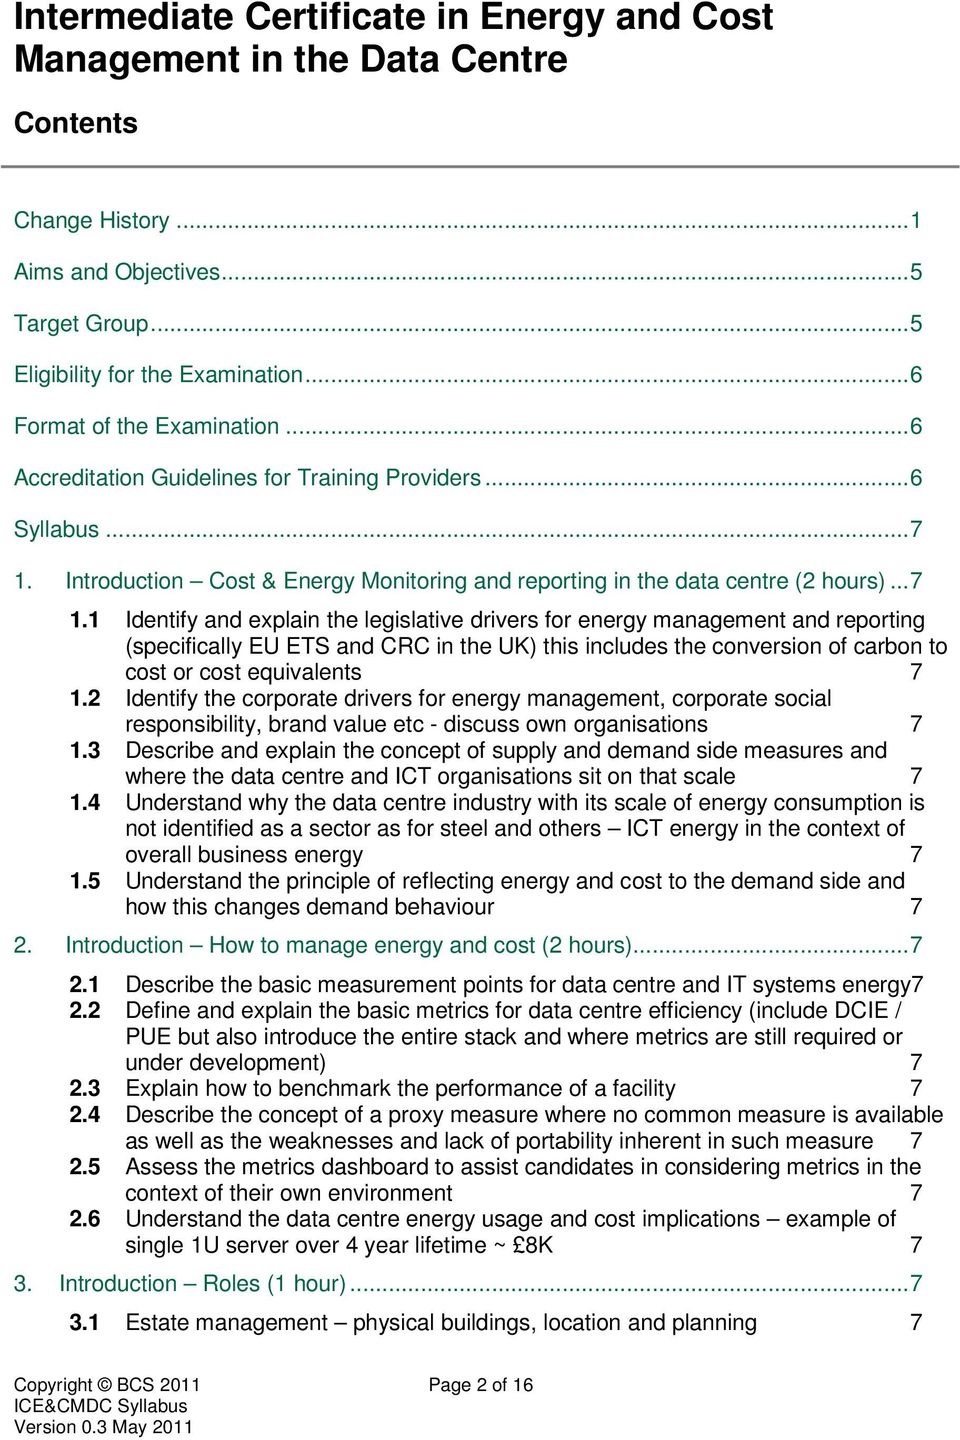 Introduction Cost & Energy Monitoring and reporting in the data centre (2 hours)...7 1.